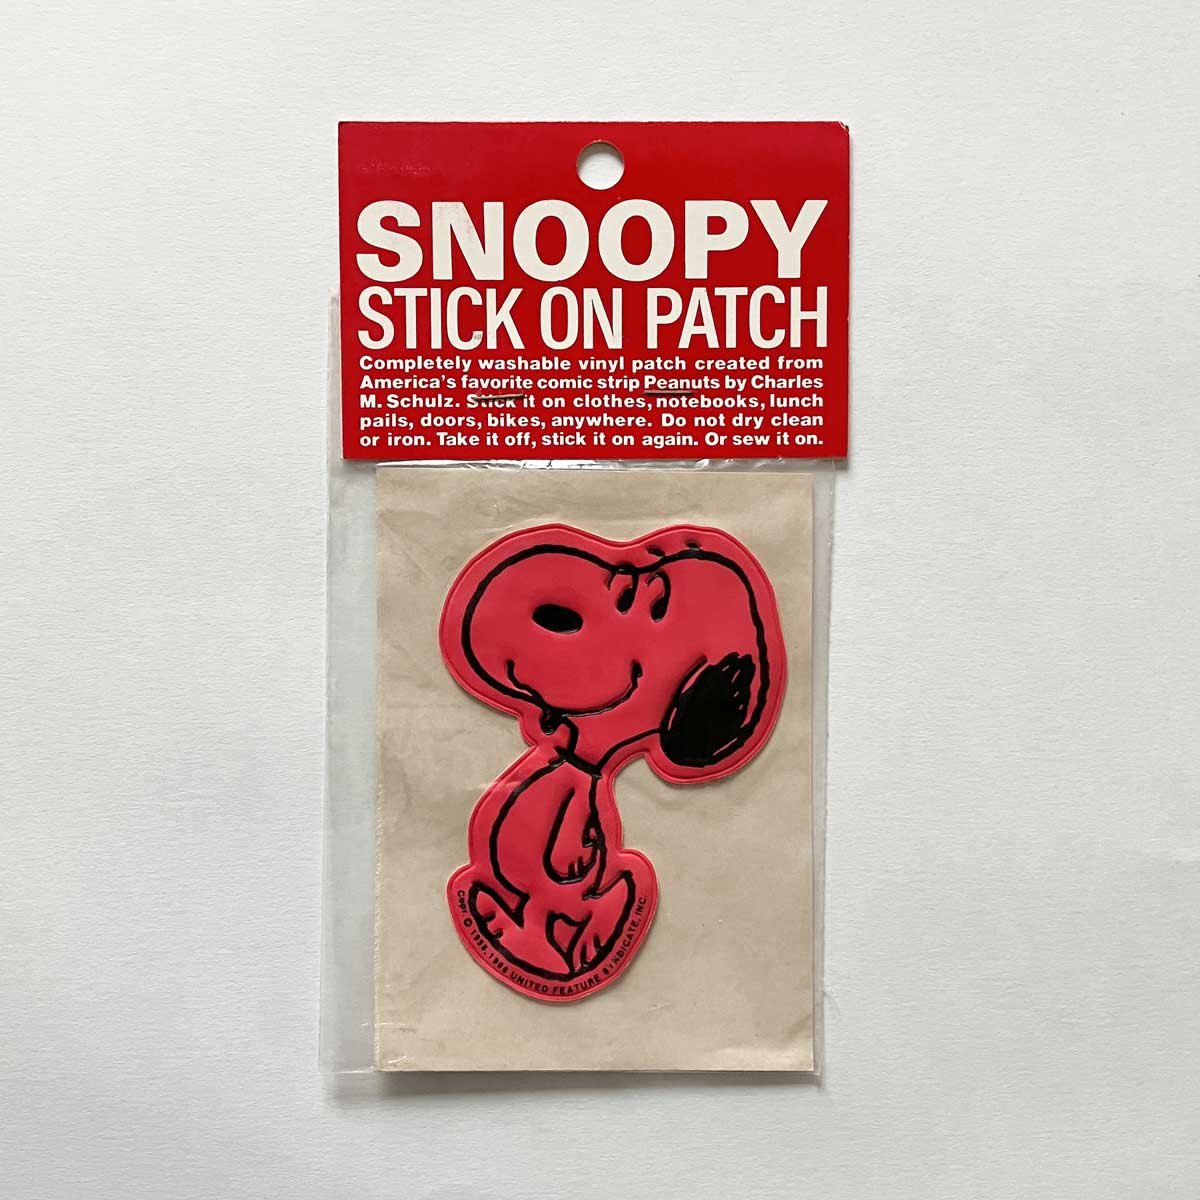 Image of Patch Snoopy rouge années 70